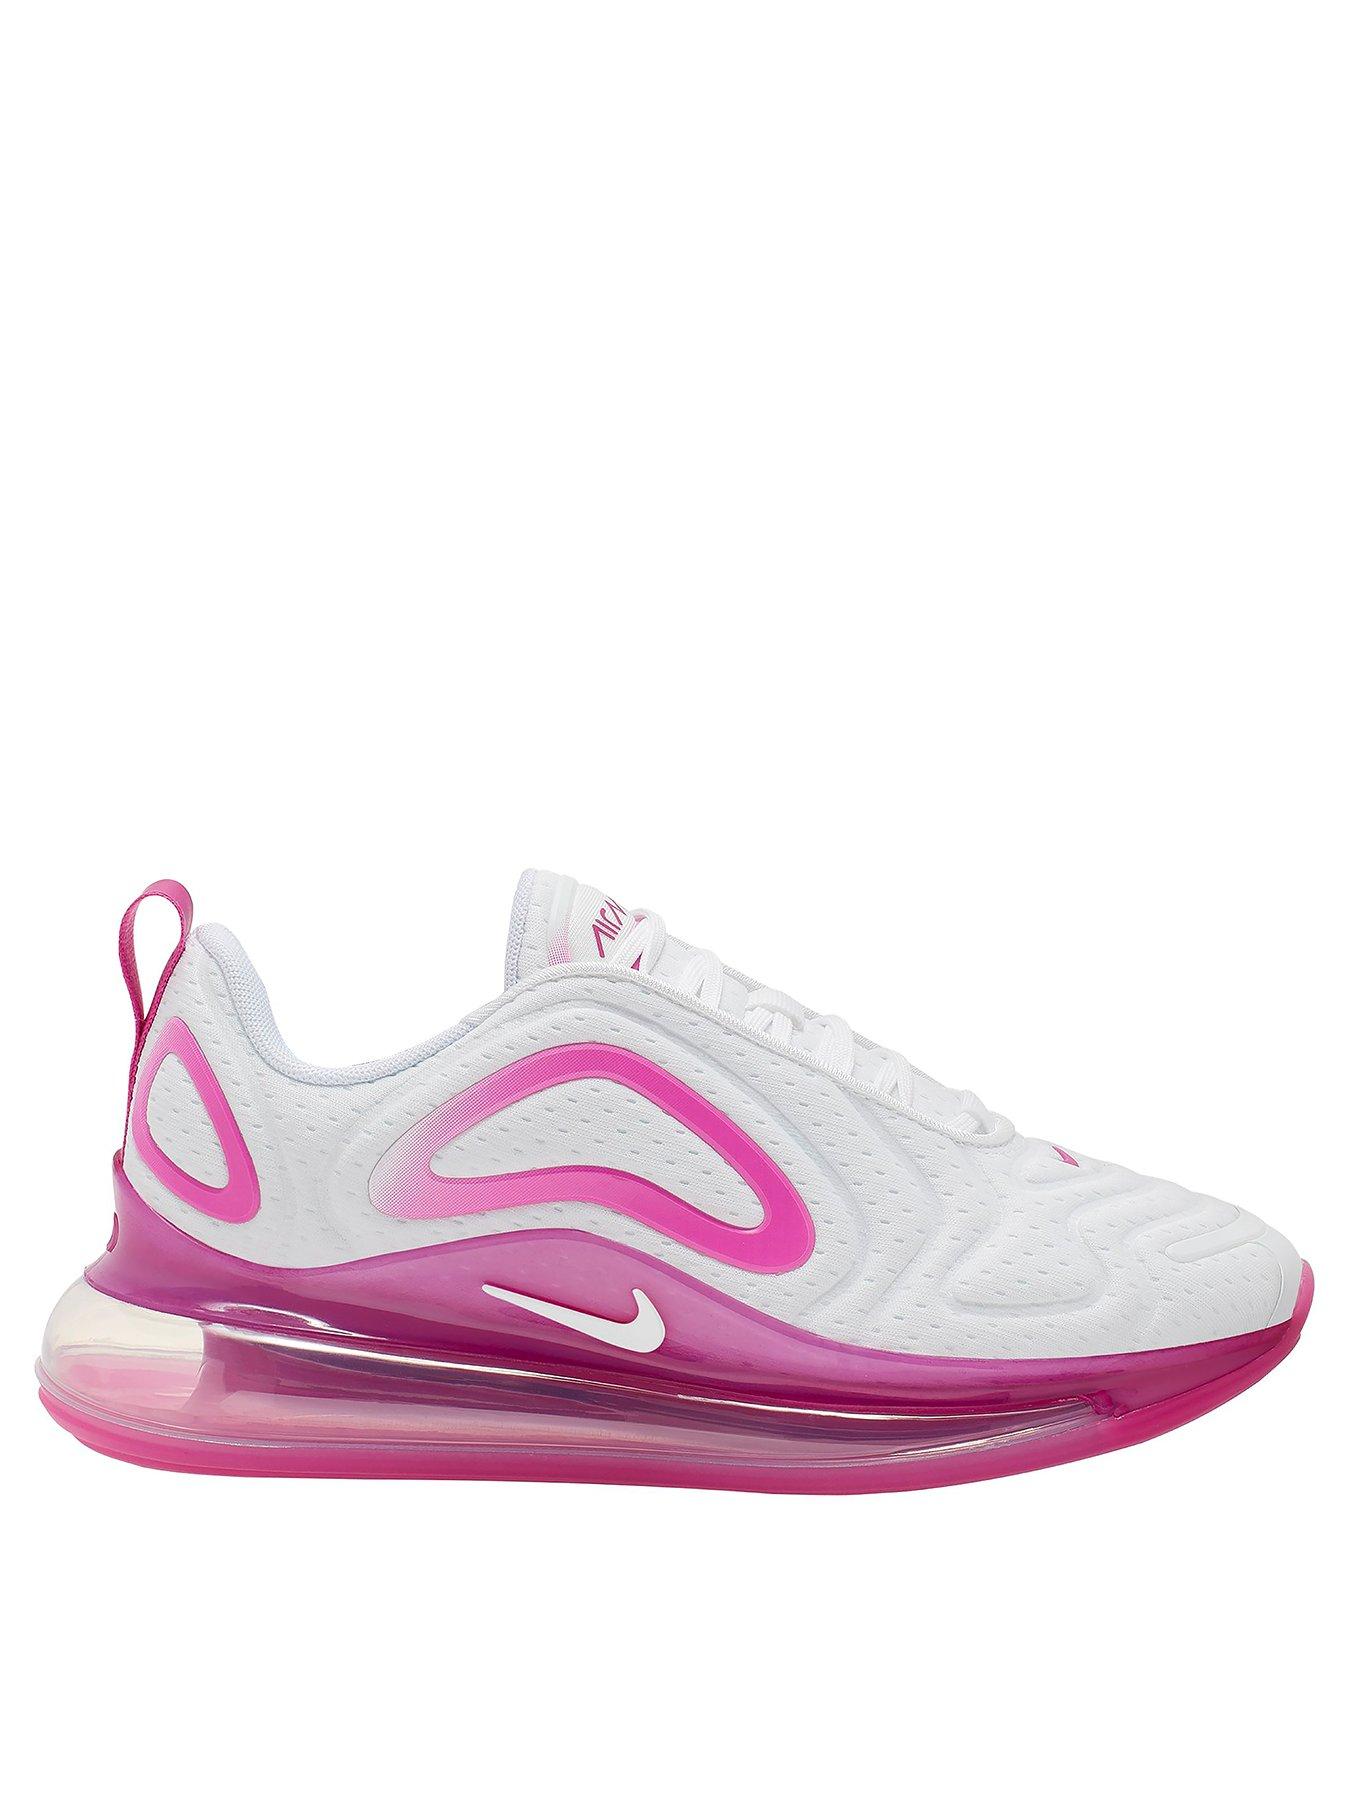 pink and white nike 720